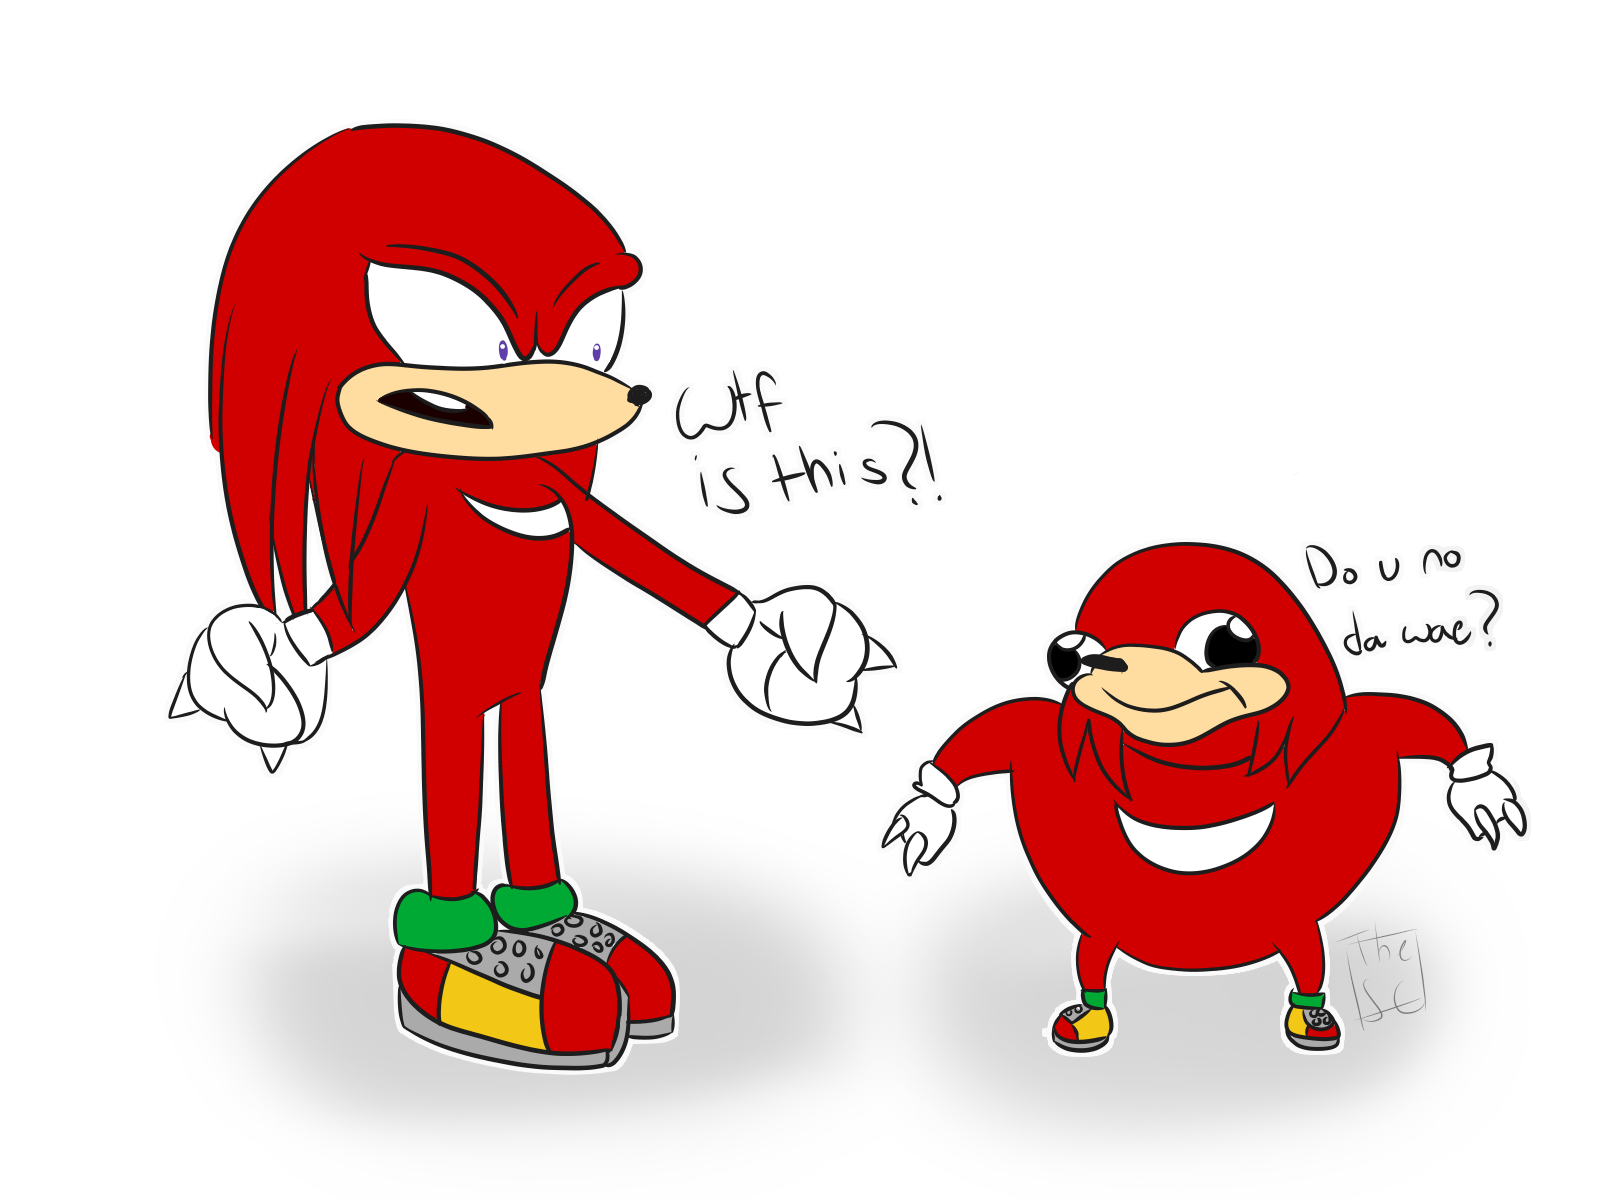 If Knuckles meets with Ugandan Knuckles .p. Ugandan, Fun facts, Memes